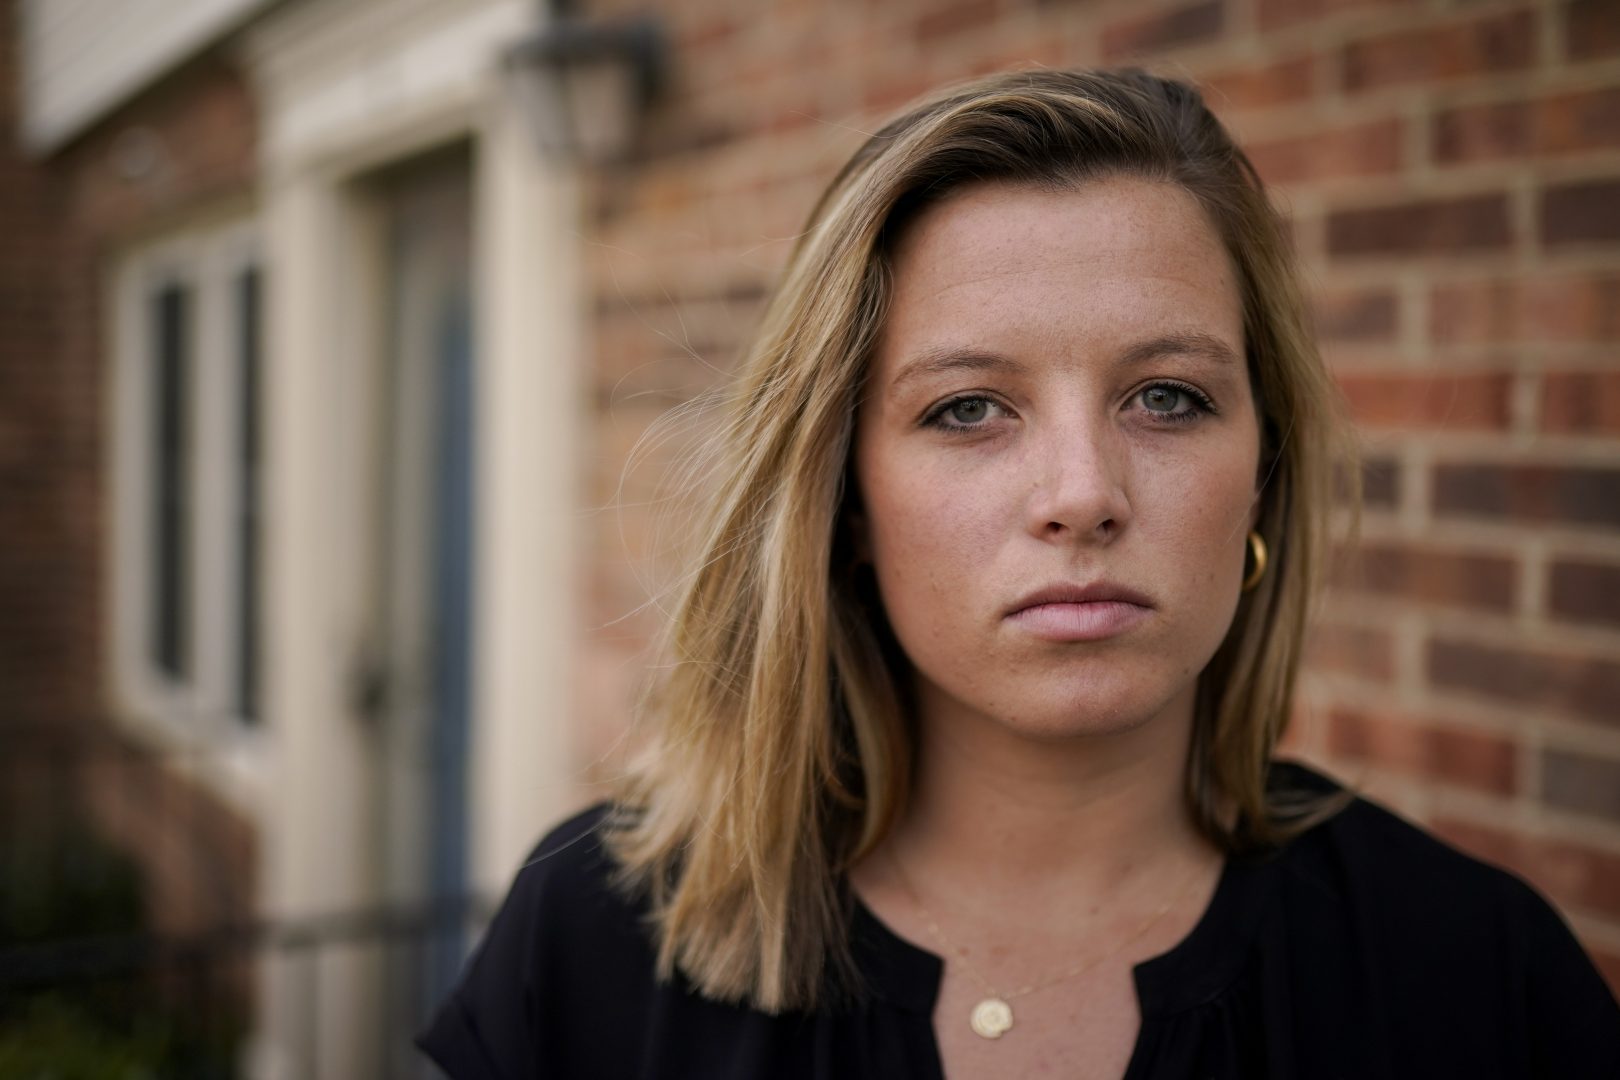 1620px x 1080px - So I raped you.' Facebook message renews fight for justice for former  Gettysburg College student | WITF